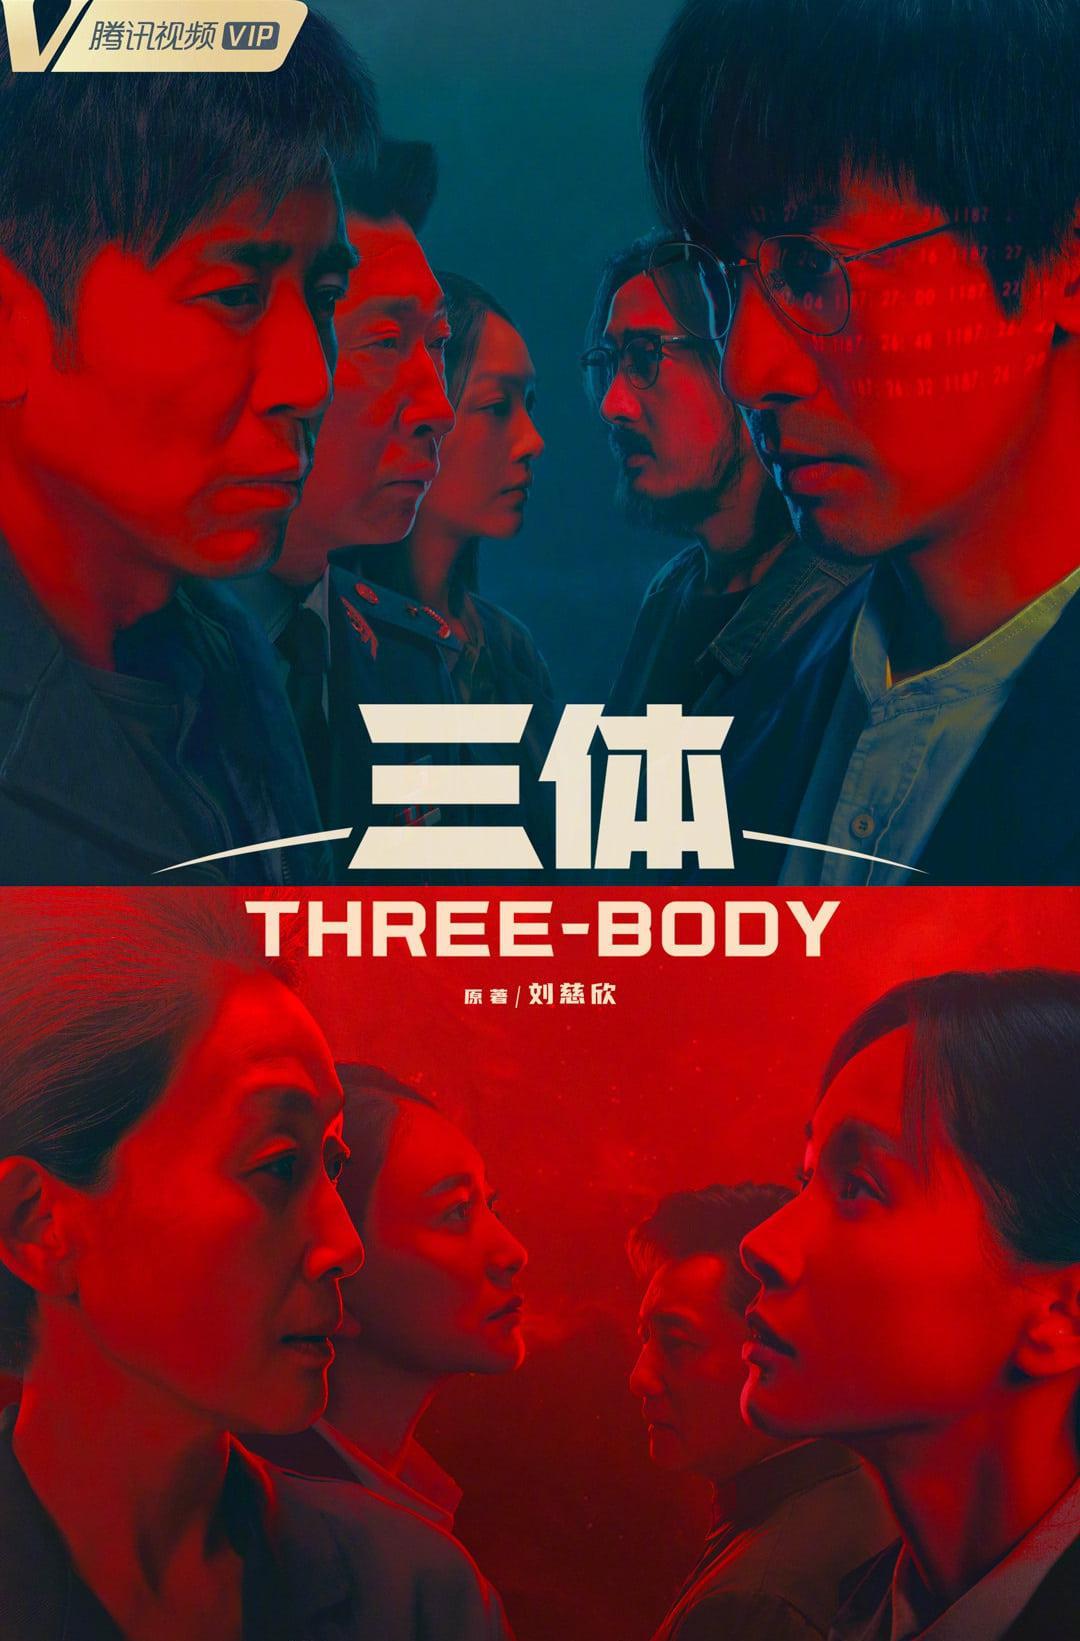 TV ratings for Three-Body (三体) in the United Kingdom. Tencent Video TV series